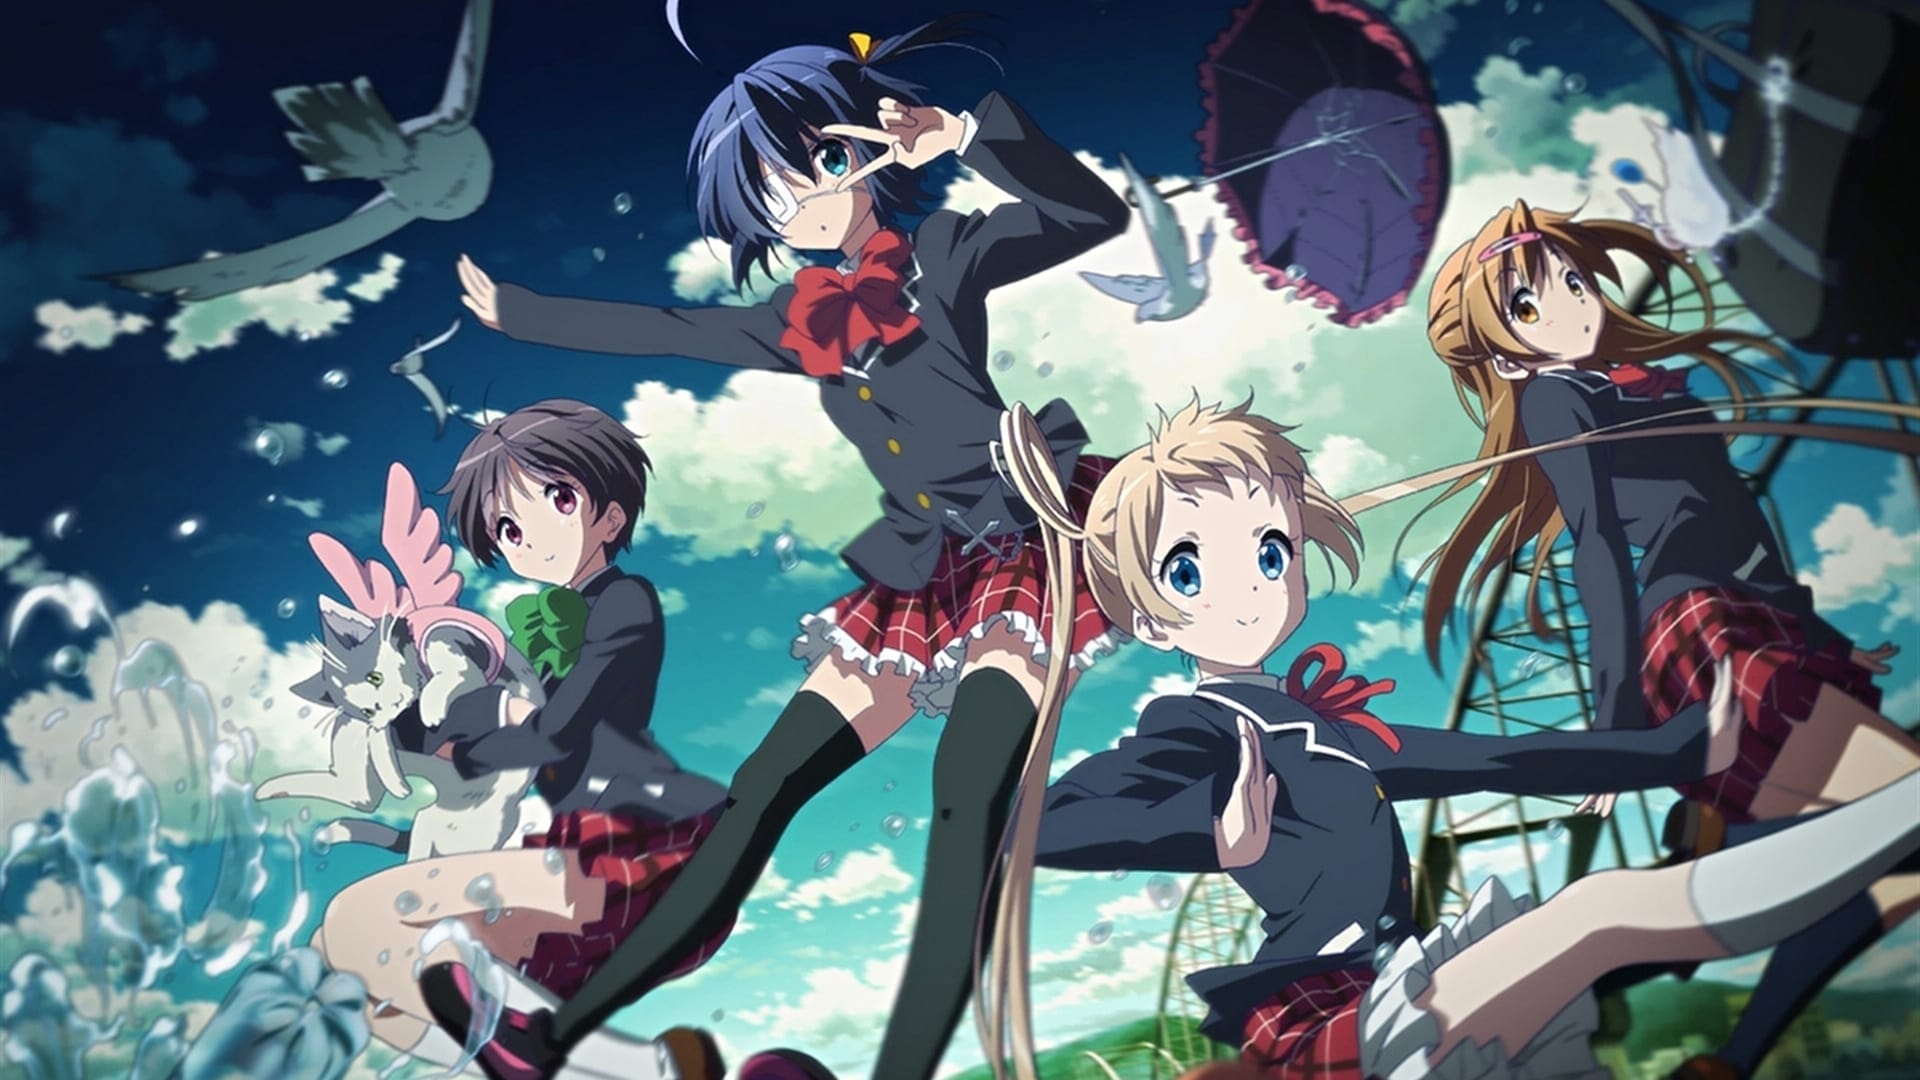 Love Chunibyo & Other Delusions